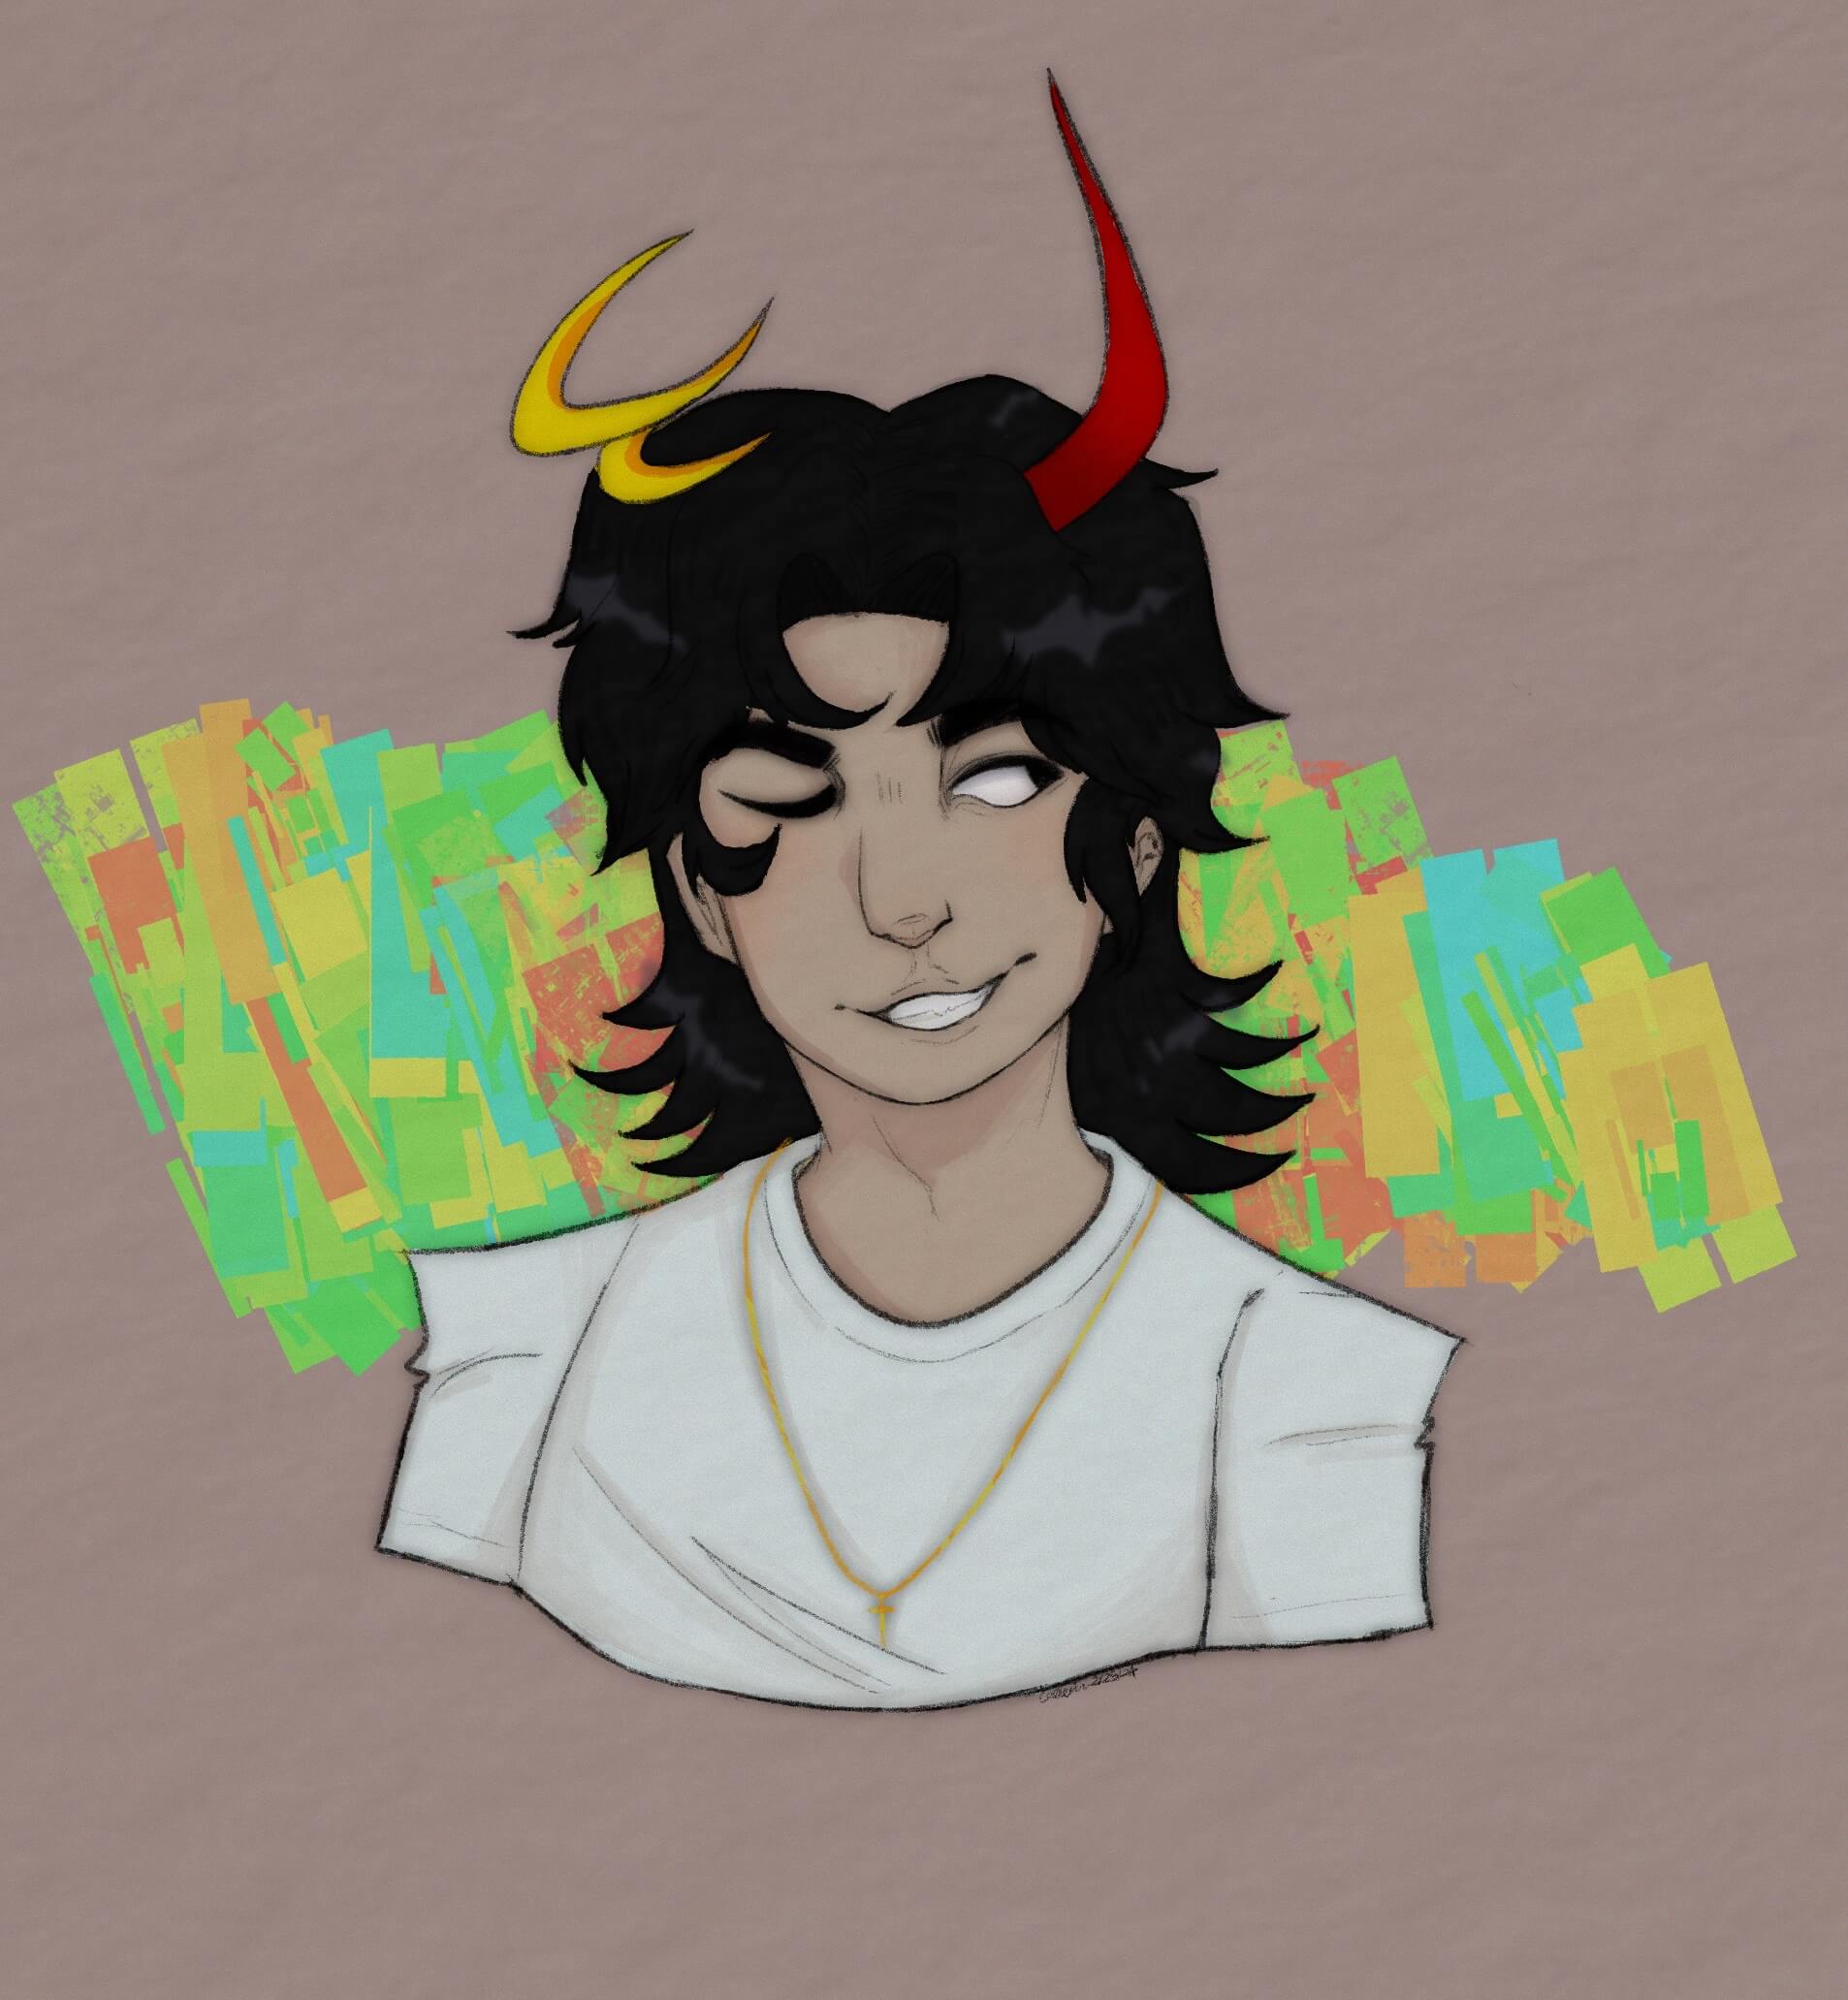 A bust of a character with medium length black hair, a red horn, and a spiral gold halo wearing a white shirt